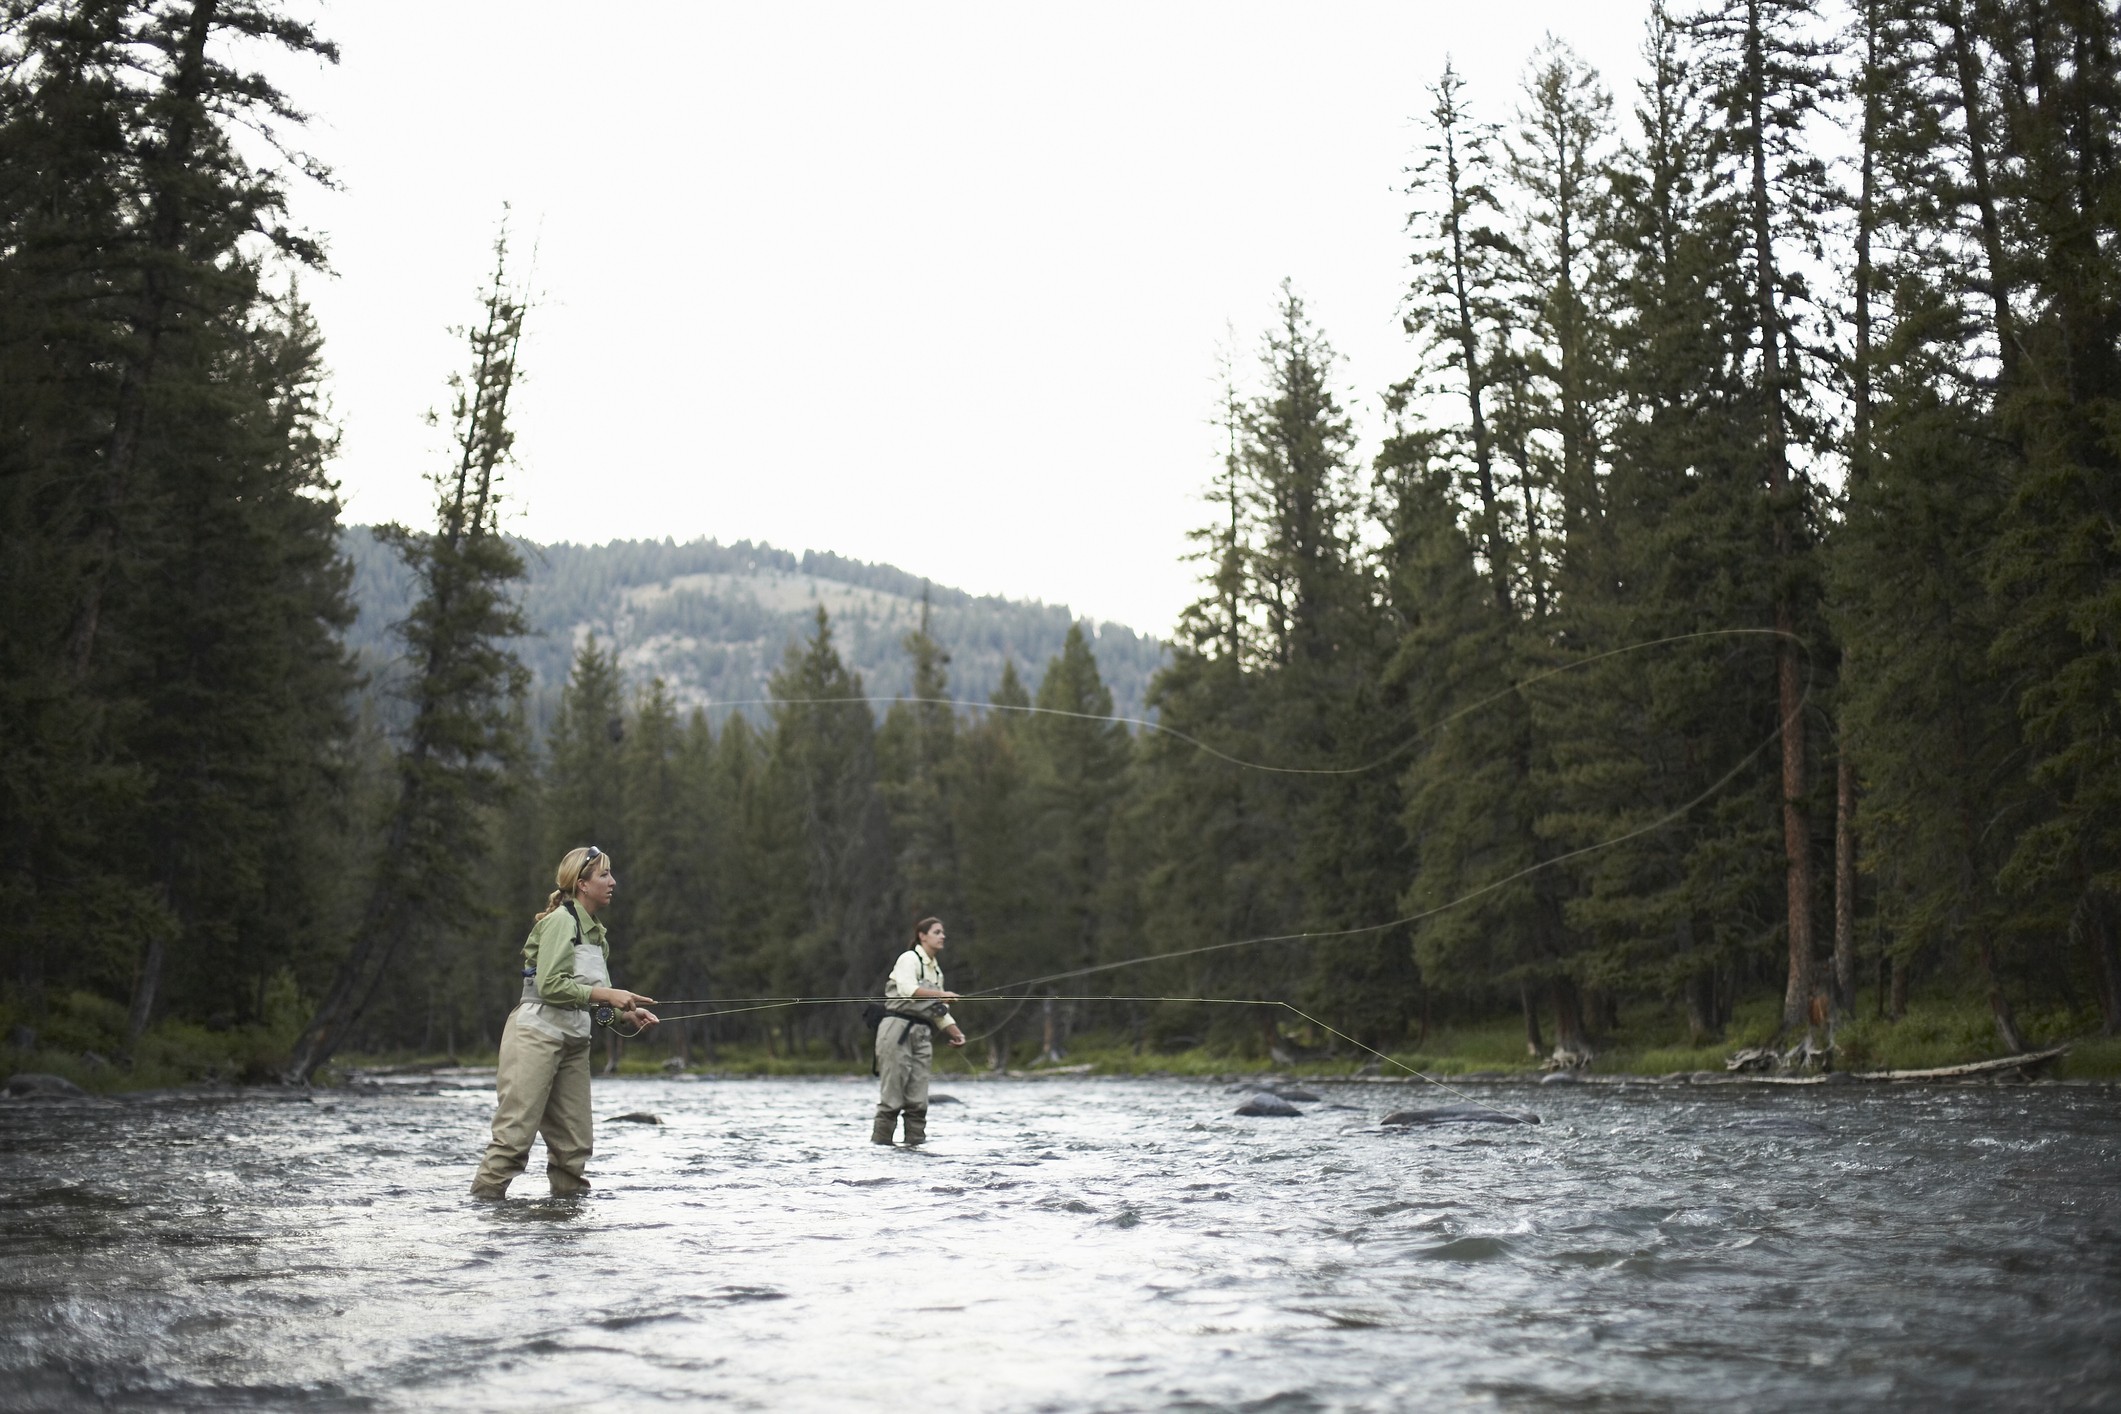 Montana, Gallatin River, Cameron. (Getty Images)